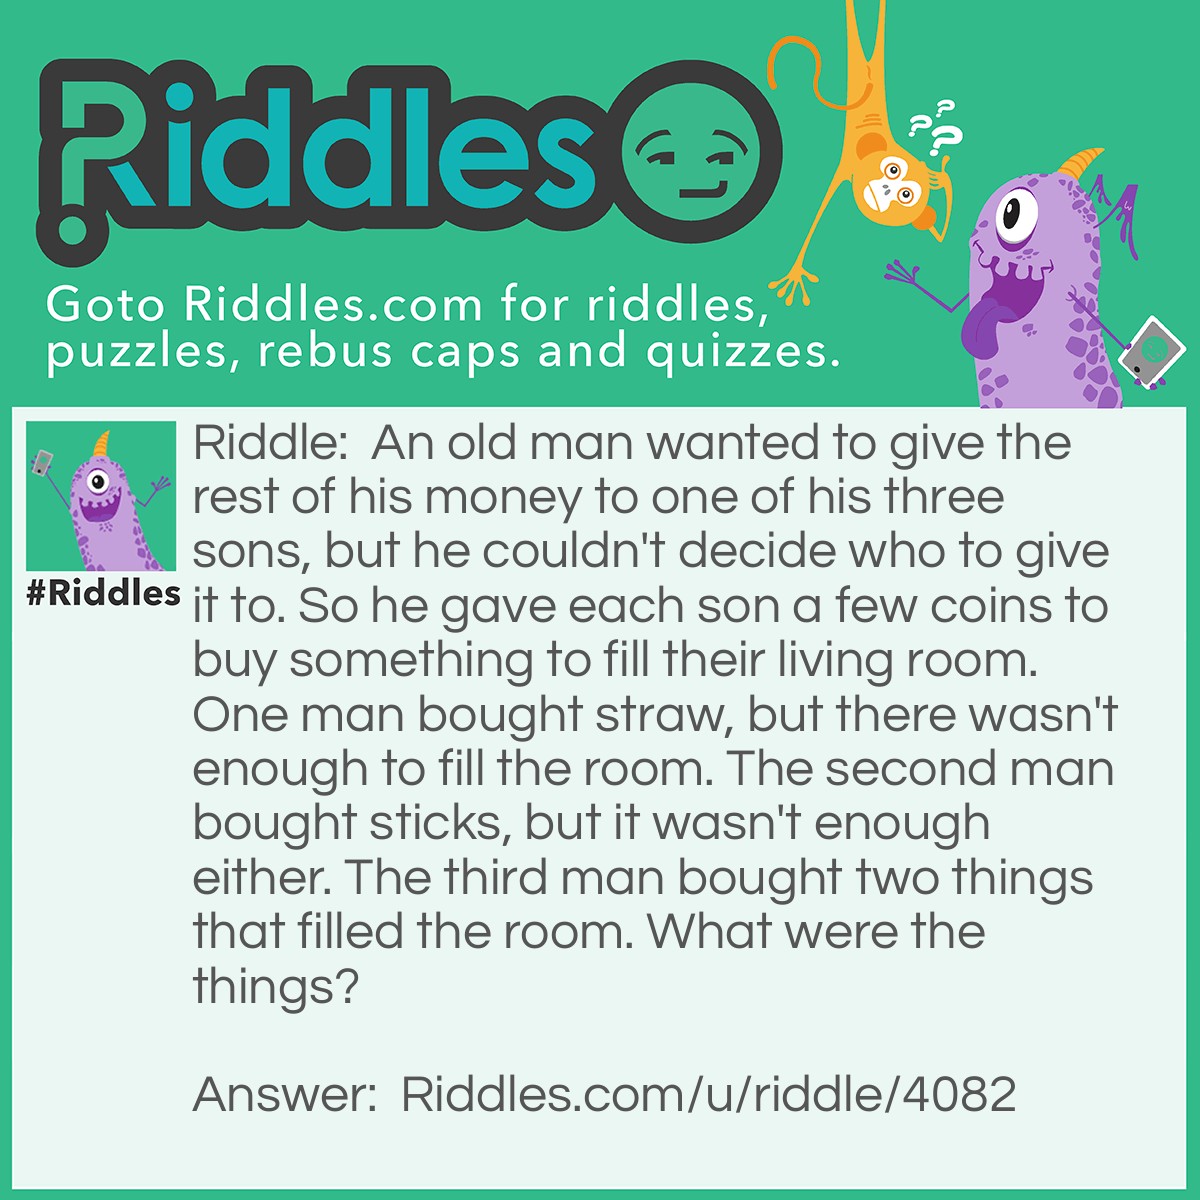 Riddle: An old man wanted to give the rest of his money to one of his three sons, but he couldn't decide who to give it to. So he gave each son a few coins to buy something to fill their living room. One man bought straw, but there wasn't enough to fill the room. The second man bought sticks, but it wasn't enough either. The third man bought two things that filled the room. What were the things? Answer: A candle and a box of matches. He used the matches to light the candle, whose light filled the room.